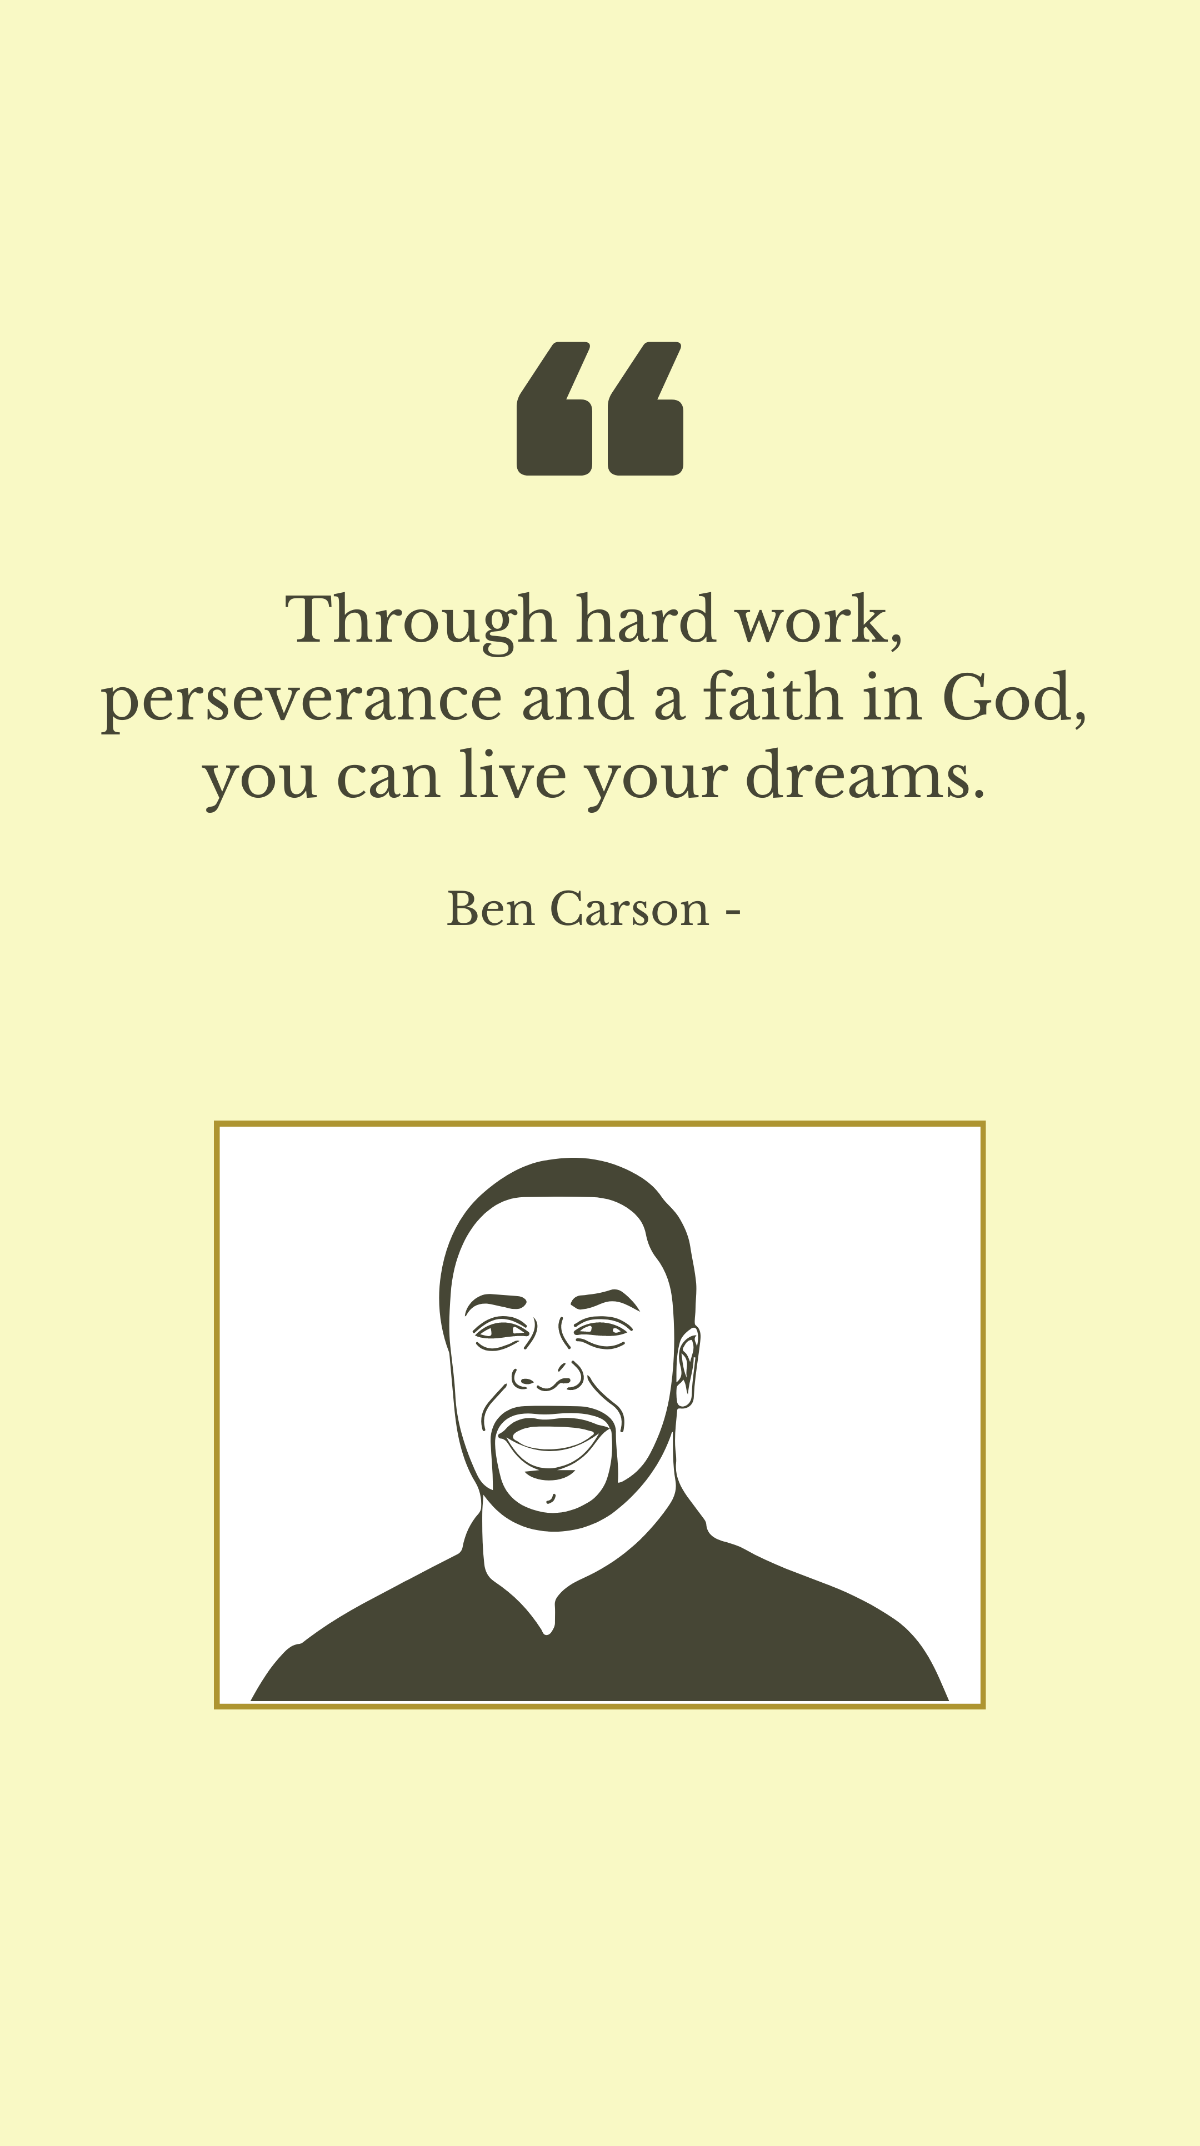 Ben Carson - Through hard work, perseverance and a faith in God, you can live your dreams. Template